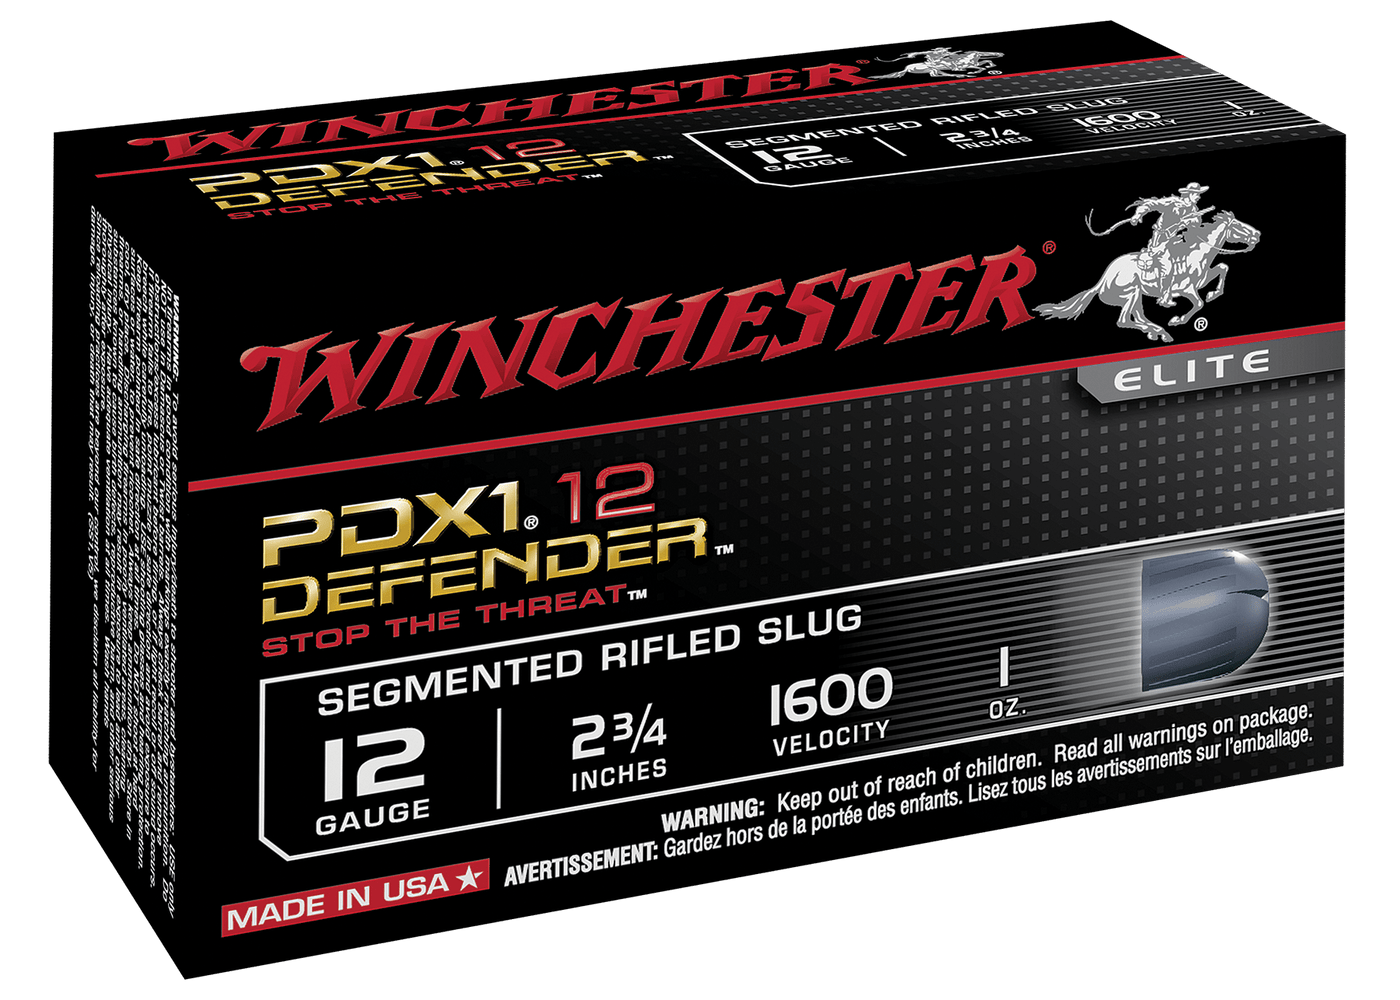 Winchester Ammo Winchester Defender Load 12 Ga. 2.75in. 1oz. 3-150 Gr. Pieces Shot 10rd Ammo